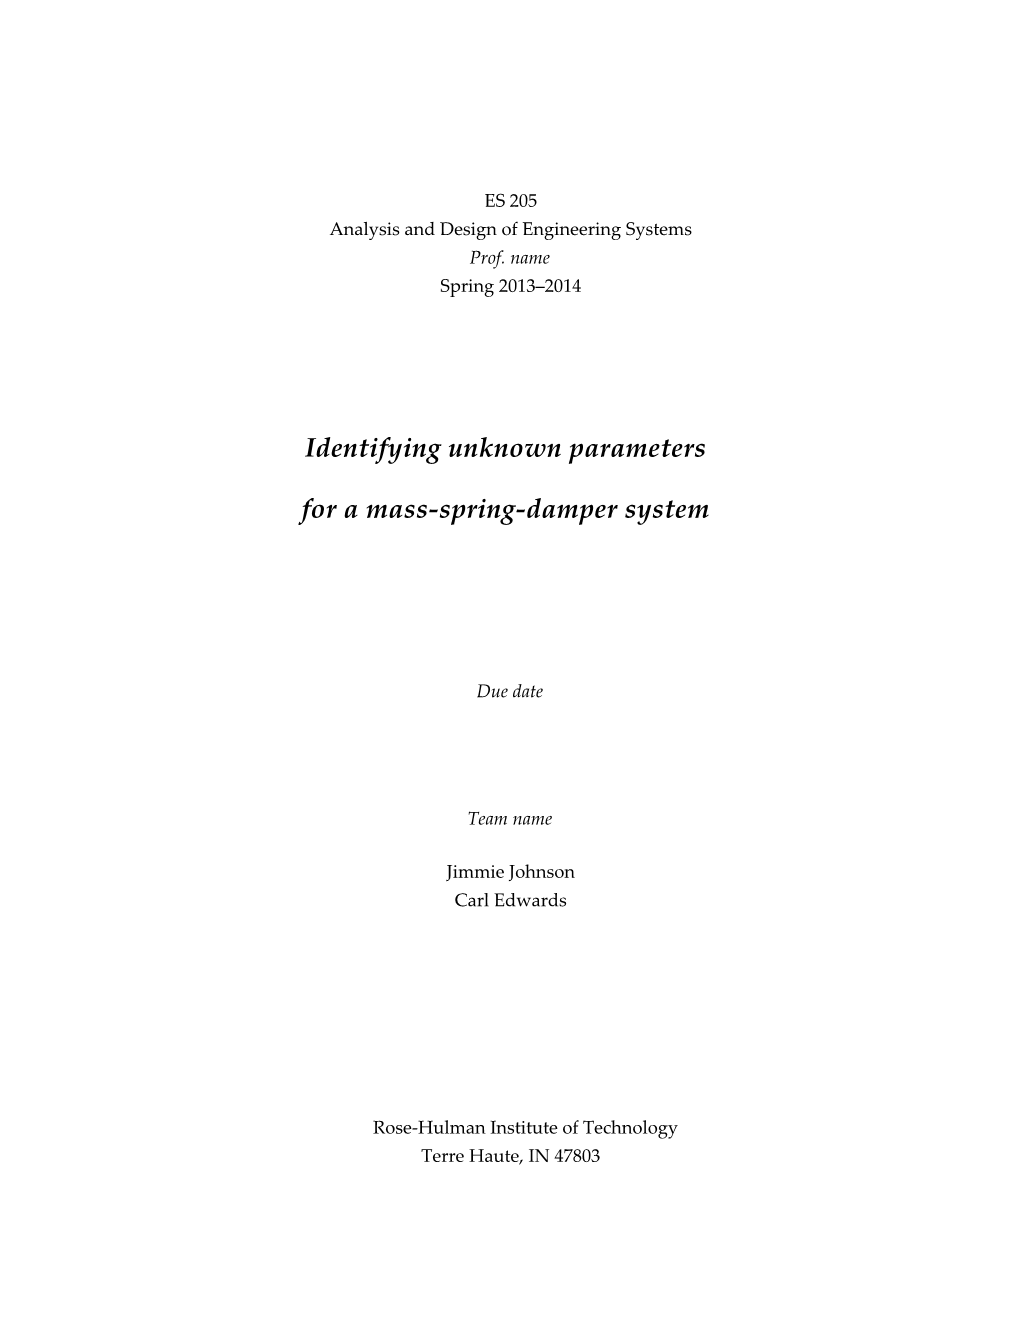 Analysis and Design of Engineering Systems